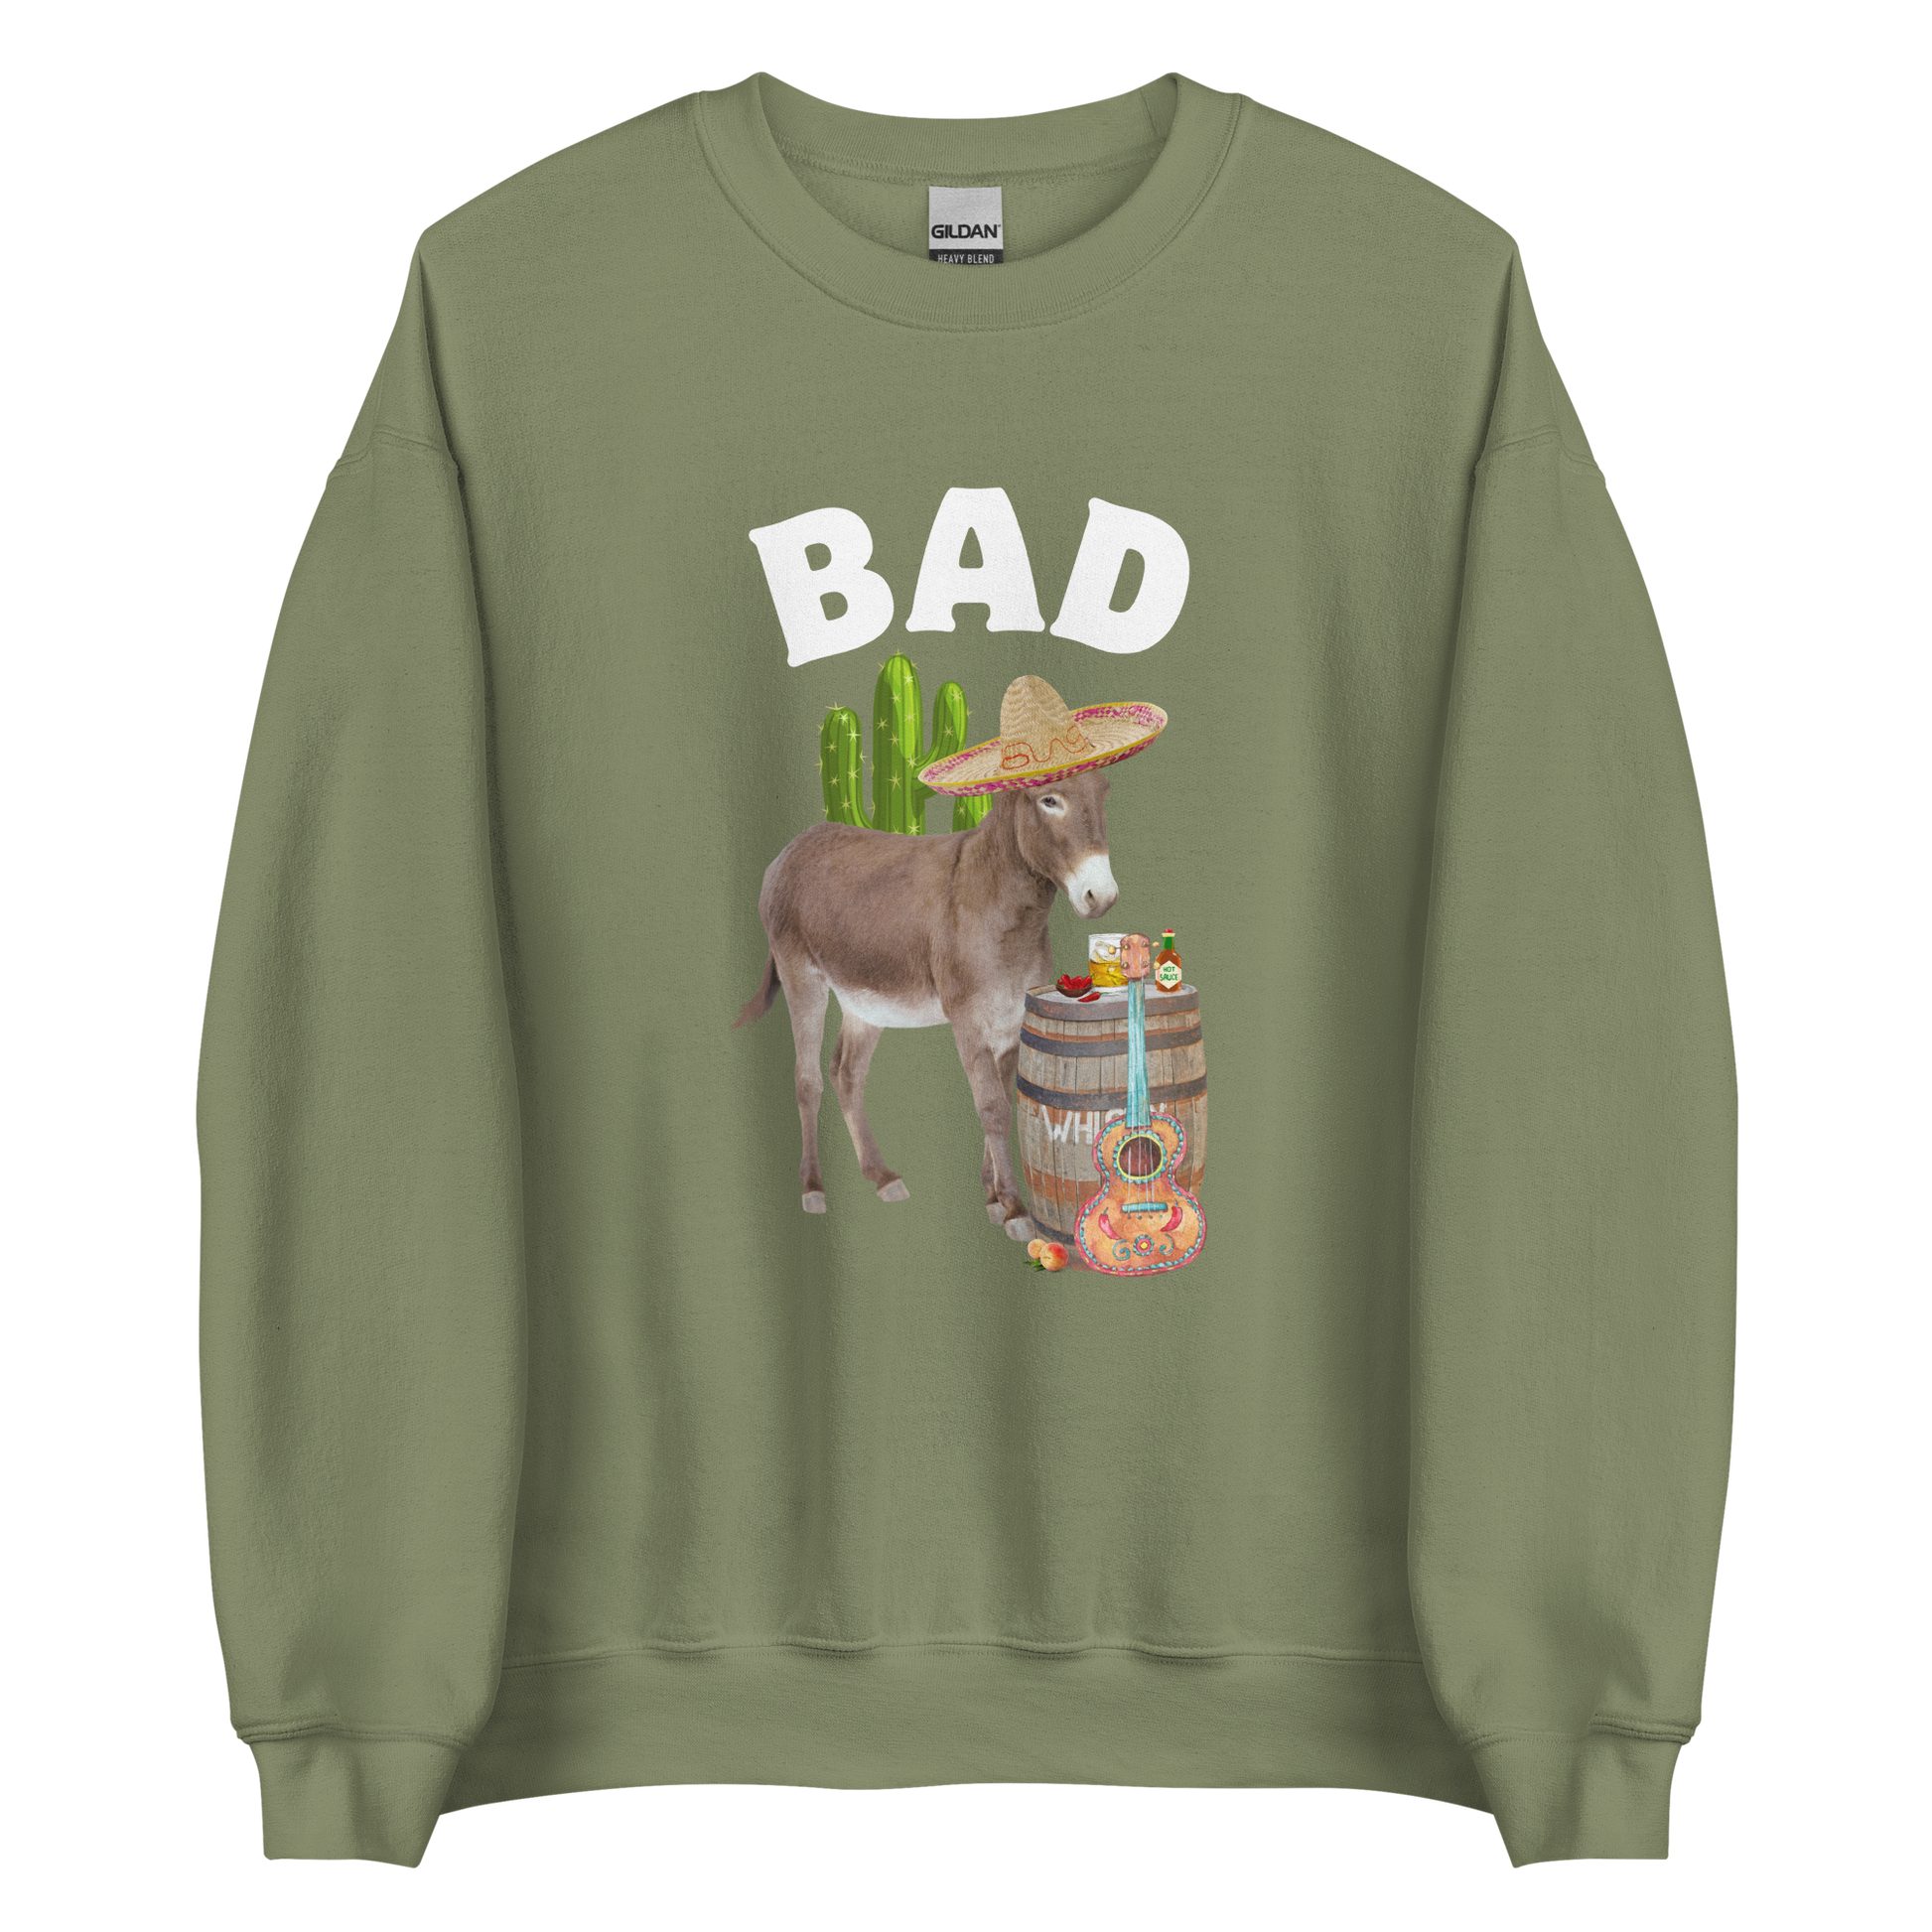 Military Green Donkey Sweatshirt featuring a Funny Bad Ass Donkey graphic on the chest - Funny Graphic Bad Ass Donkey Sweatshirts - Boozy Fox